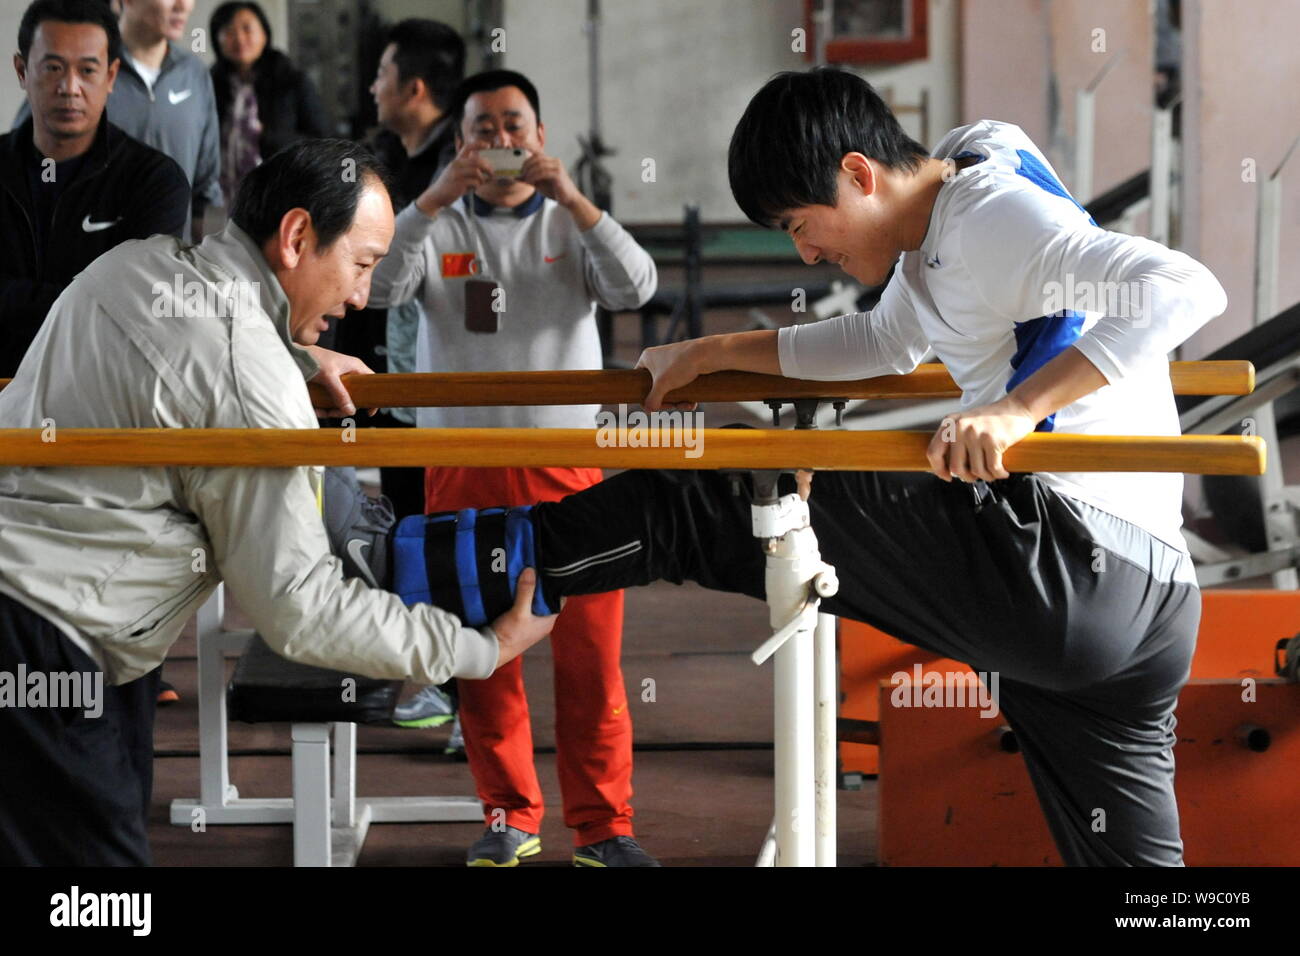 Sun Haiping, left, the coach of Chinese star hurdler Liu Xiang, helps Liu exercise during a training session at the Xinzhuang training base in Shangha Stock Photo